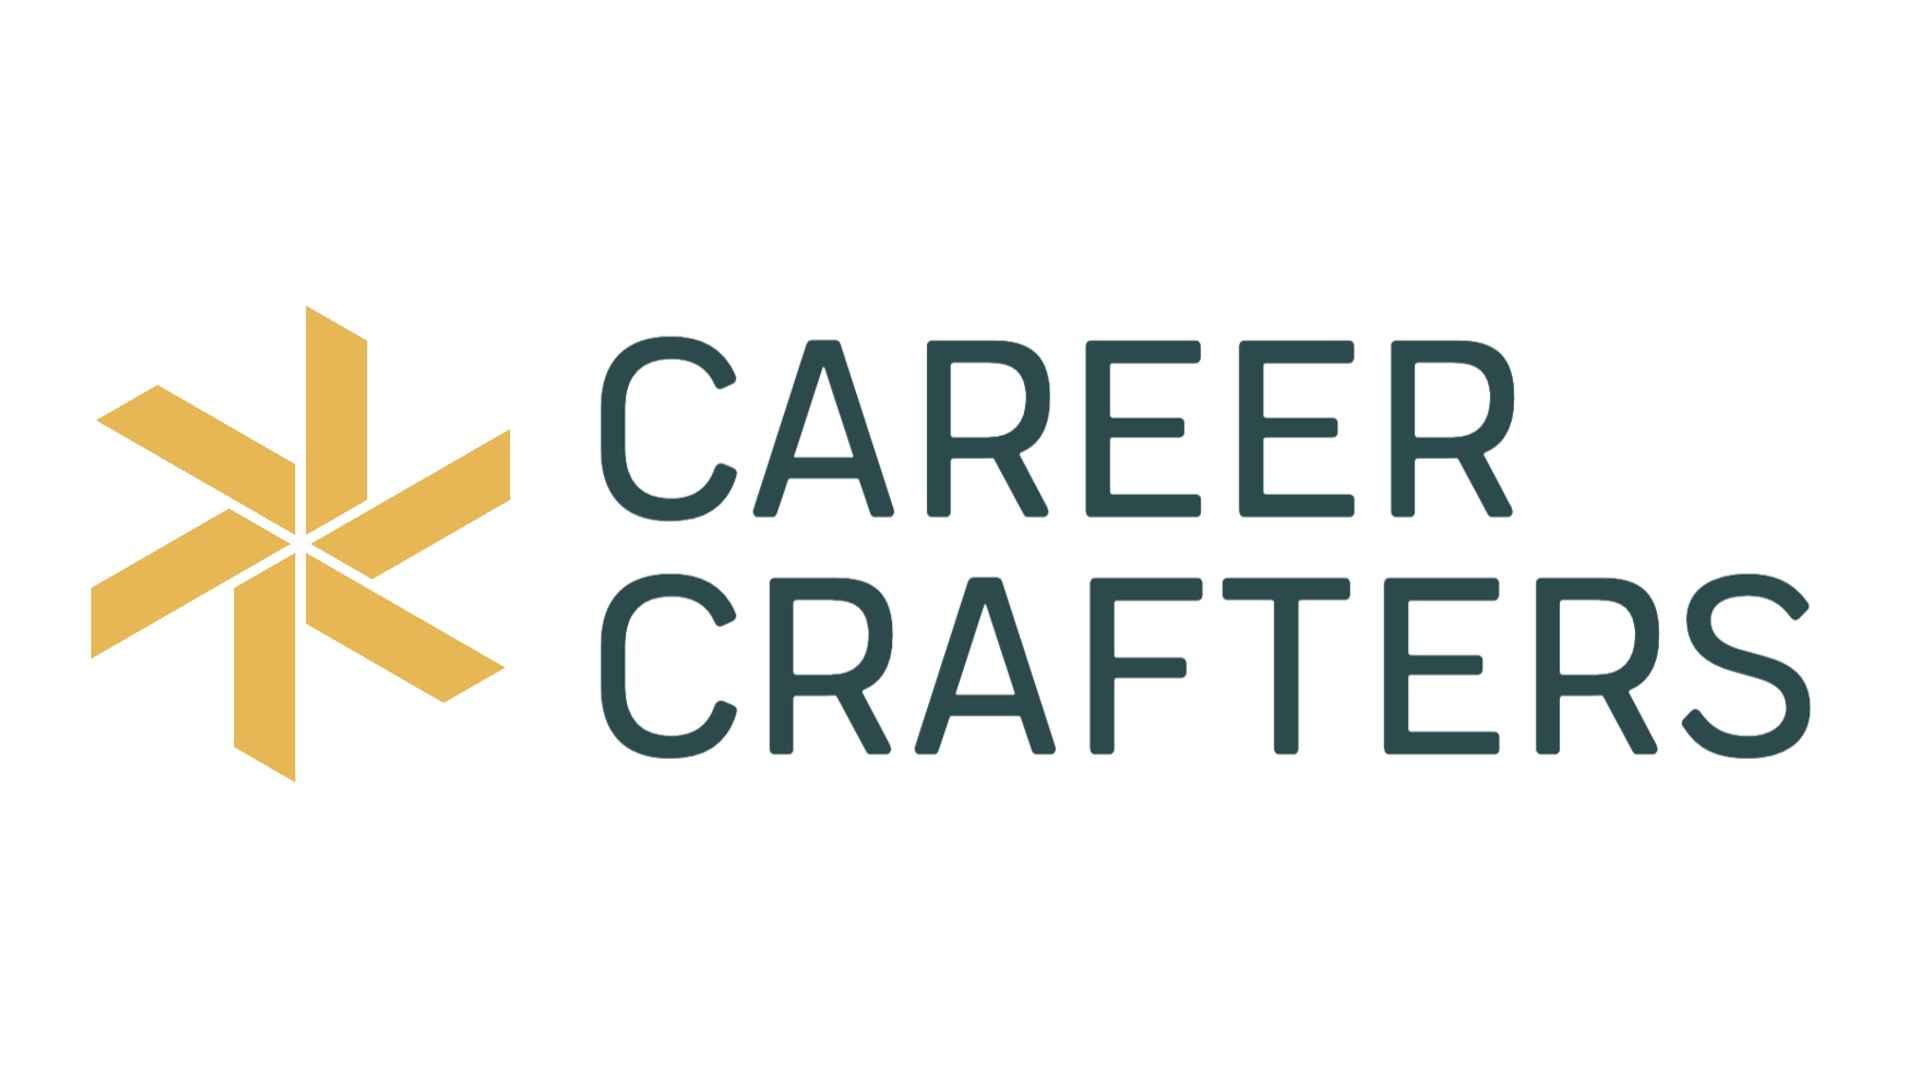 Career Crafters logo